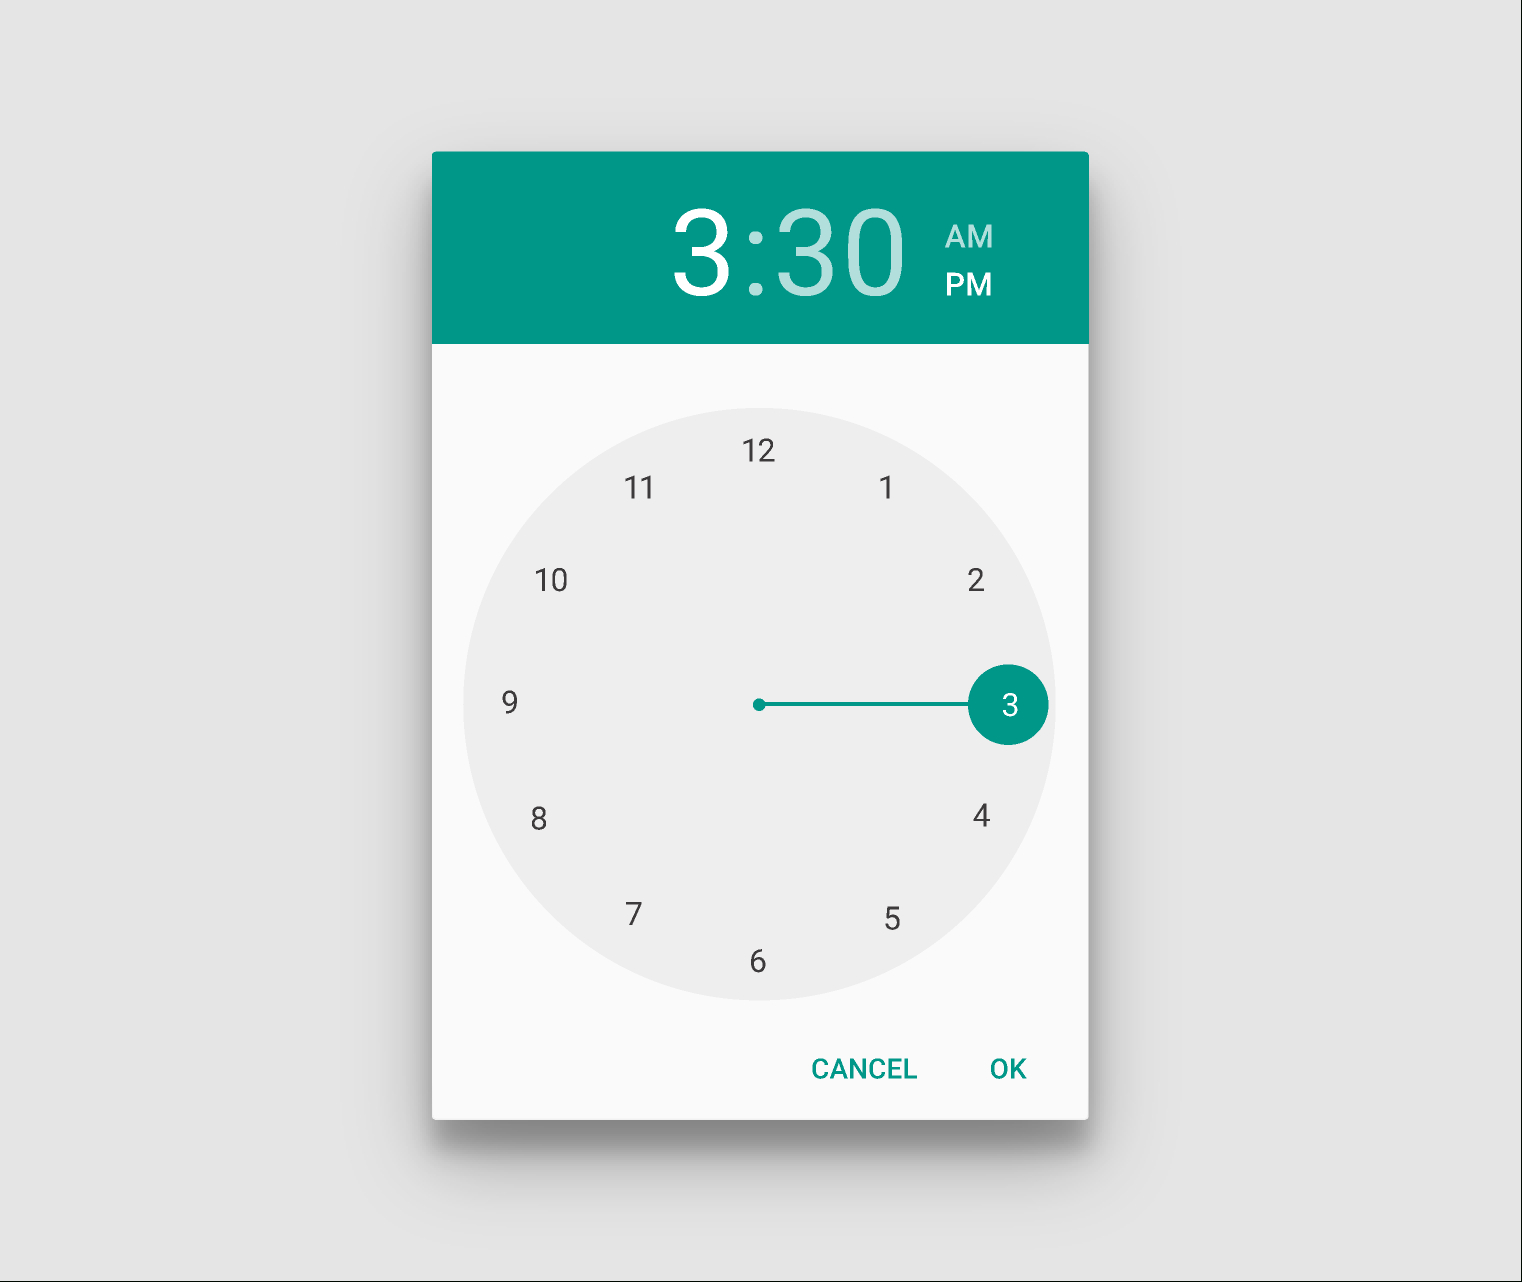 How To Customize Timepicker In Material Design Android with regard to Range Picker Android